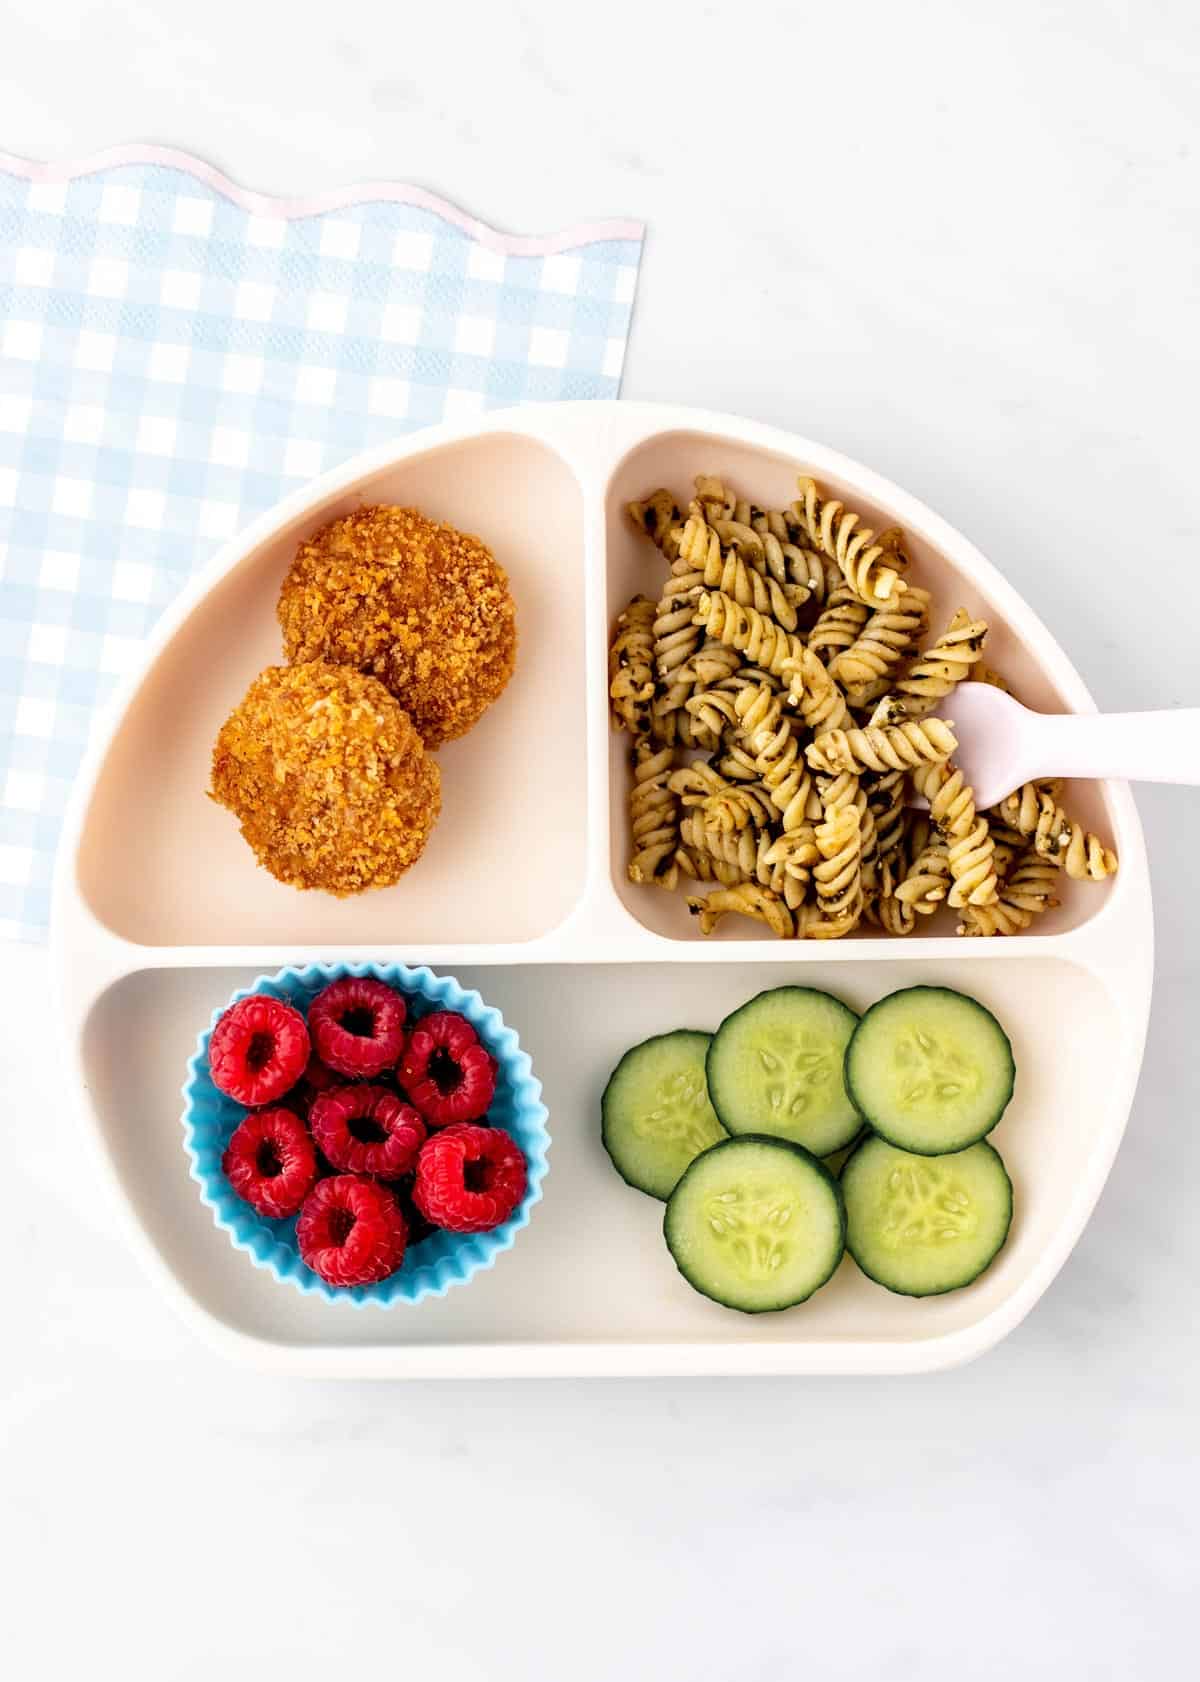 A divided plate with chicken nuggets, noodles, raspberries and cucumbers.